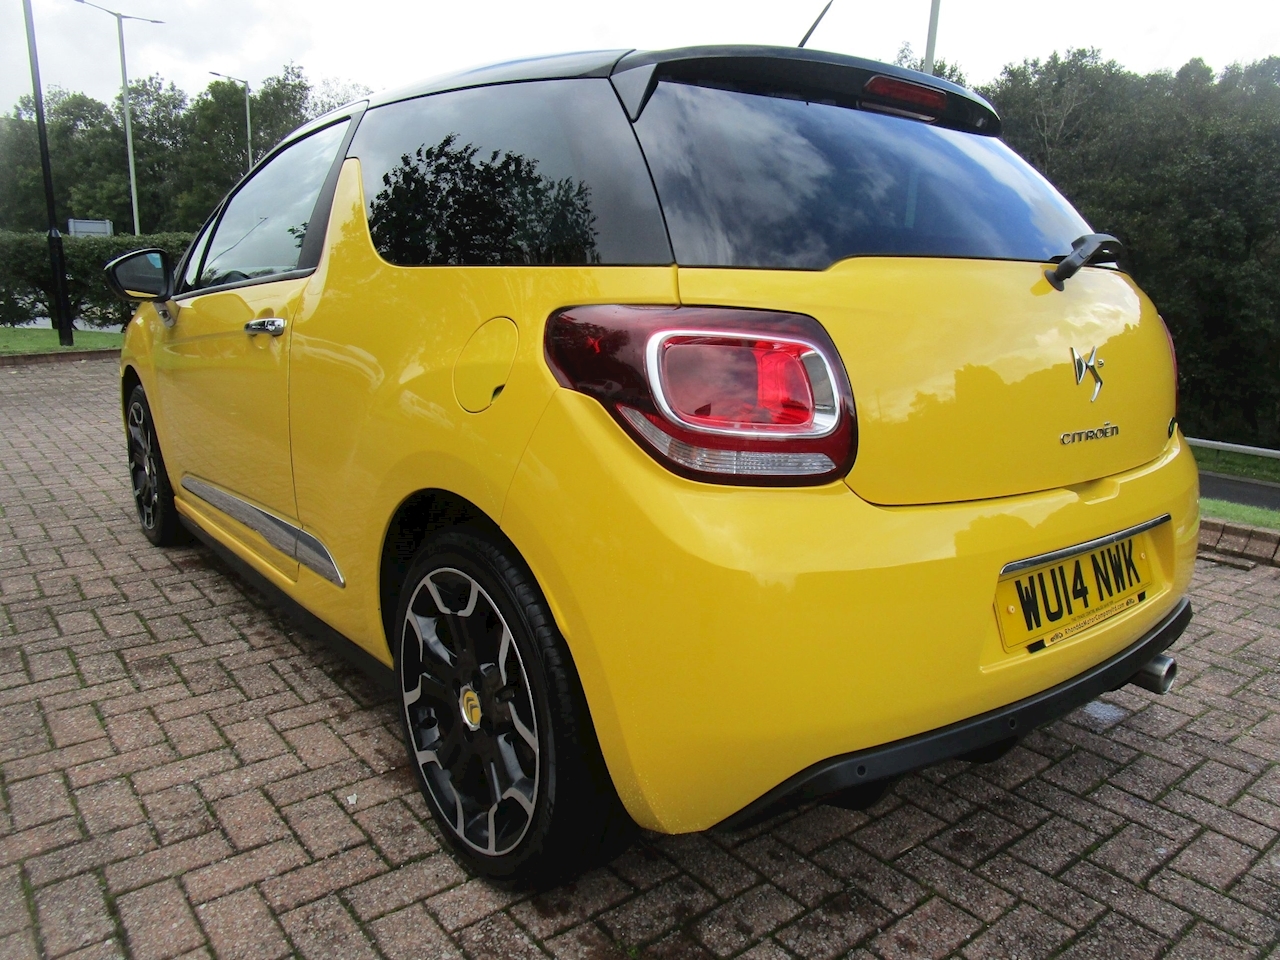 Ds3 E-Hdi Dstyle Plus Hatchback 1.6 Manual Diesel